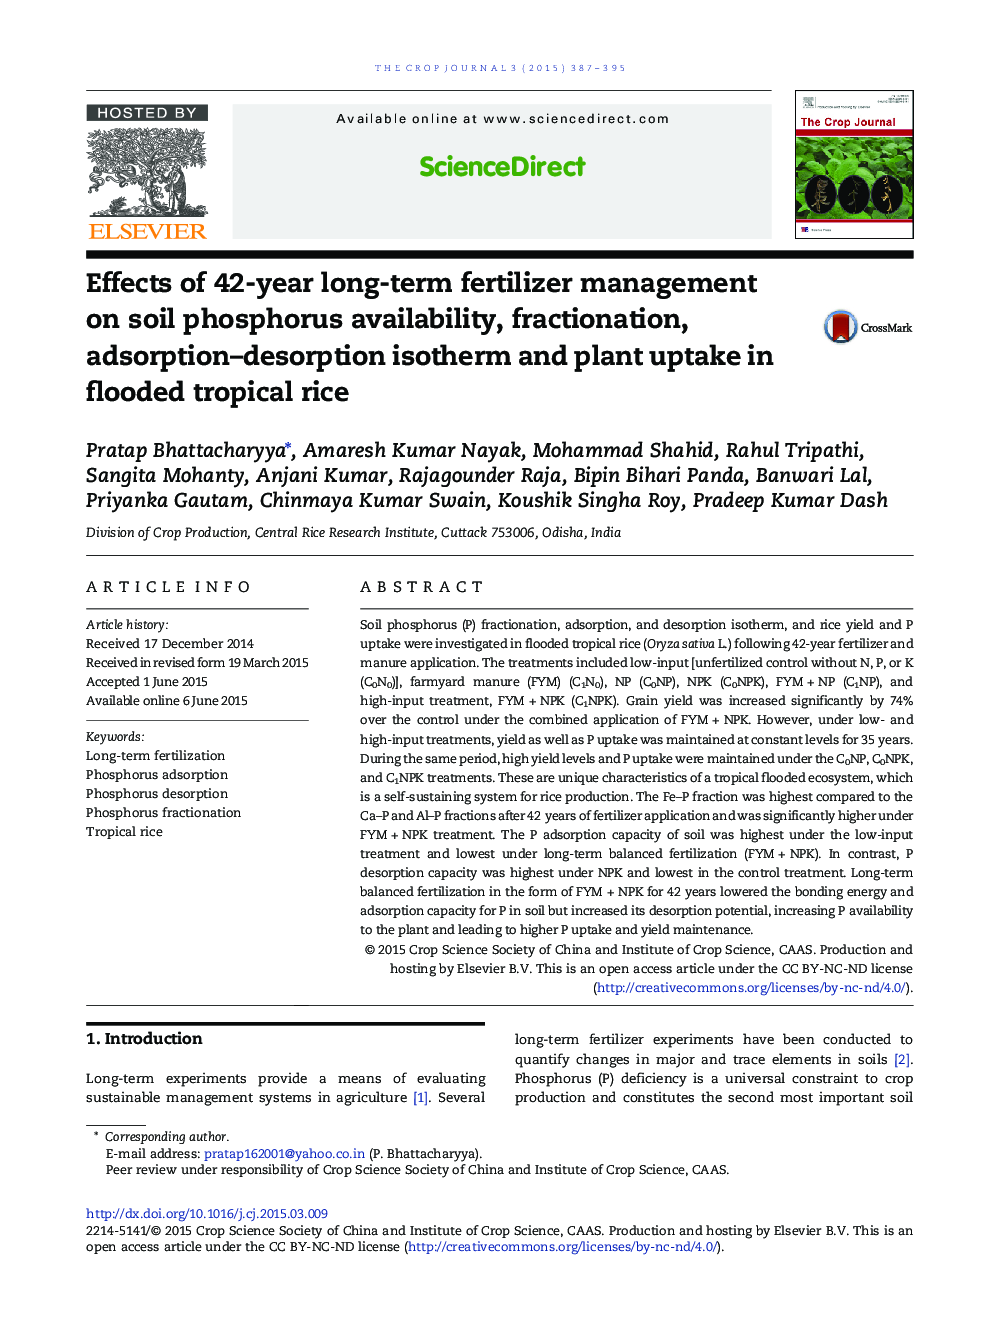 Effects of 42-year long-term fertilizer management on soil phosphorus availability, fractionation, adsorption–desorption isotherm and plant uptake in flooded tropical rice 